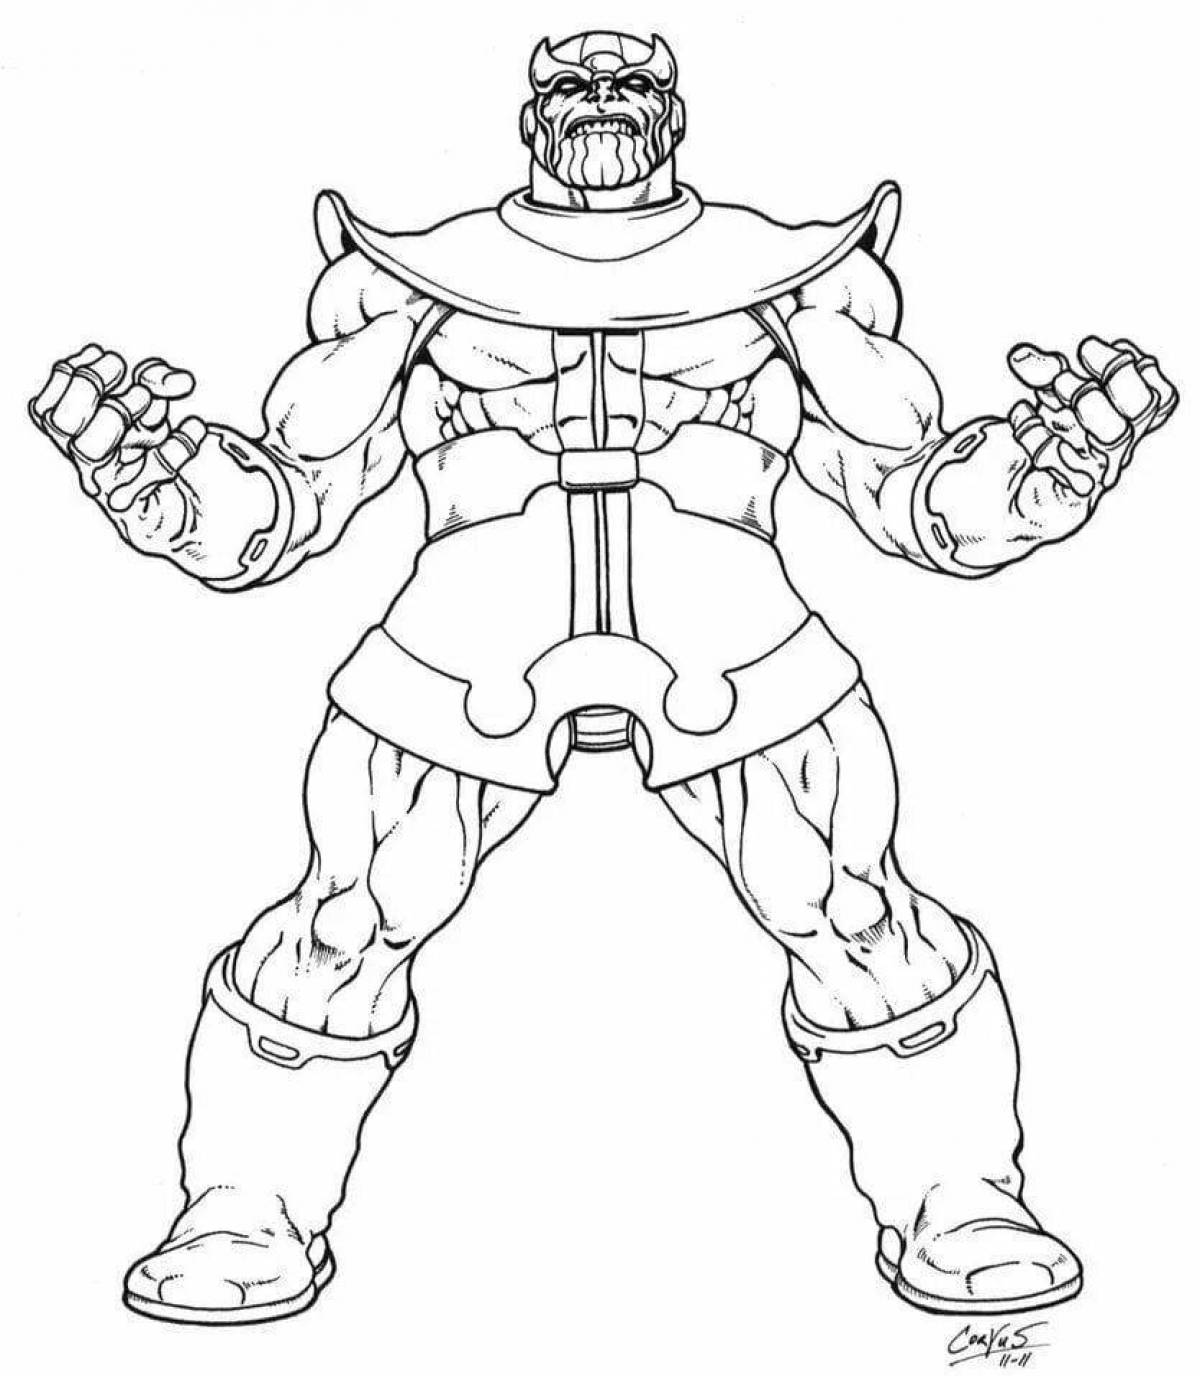 Majestic thanos coloring page